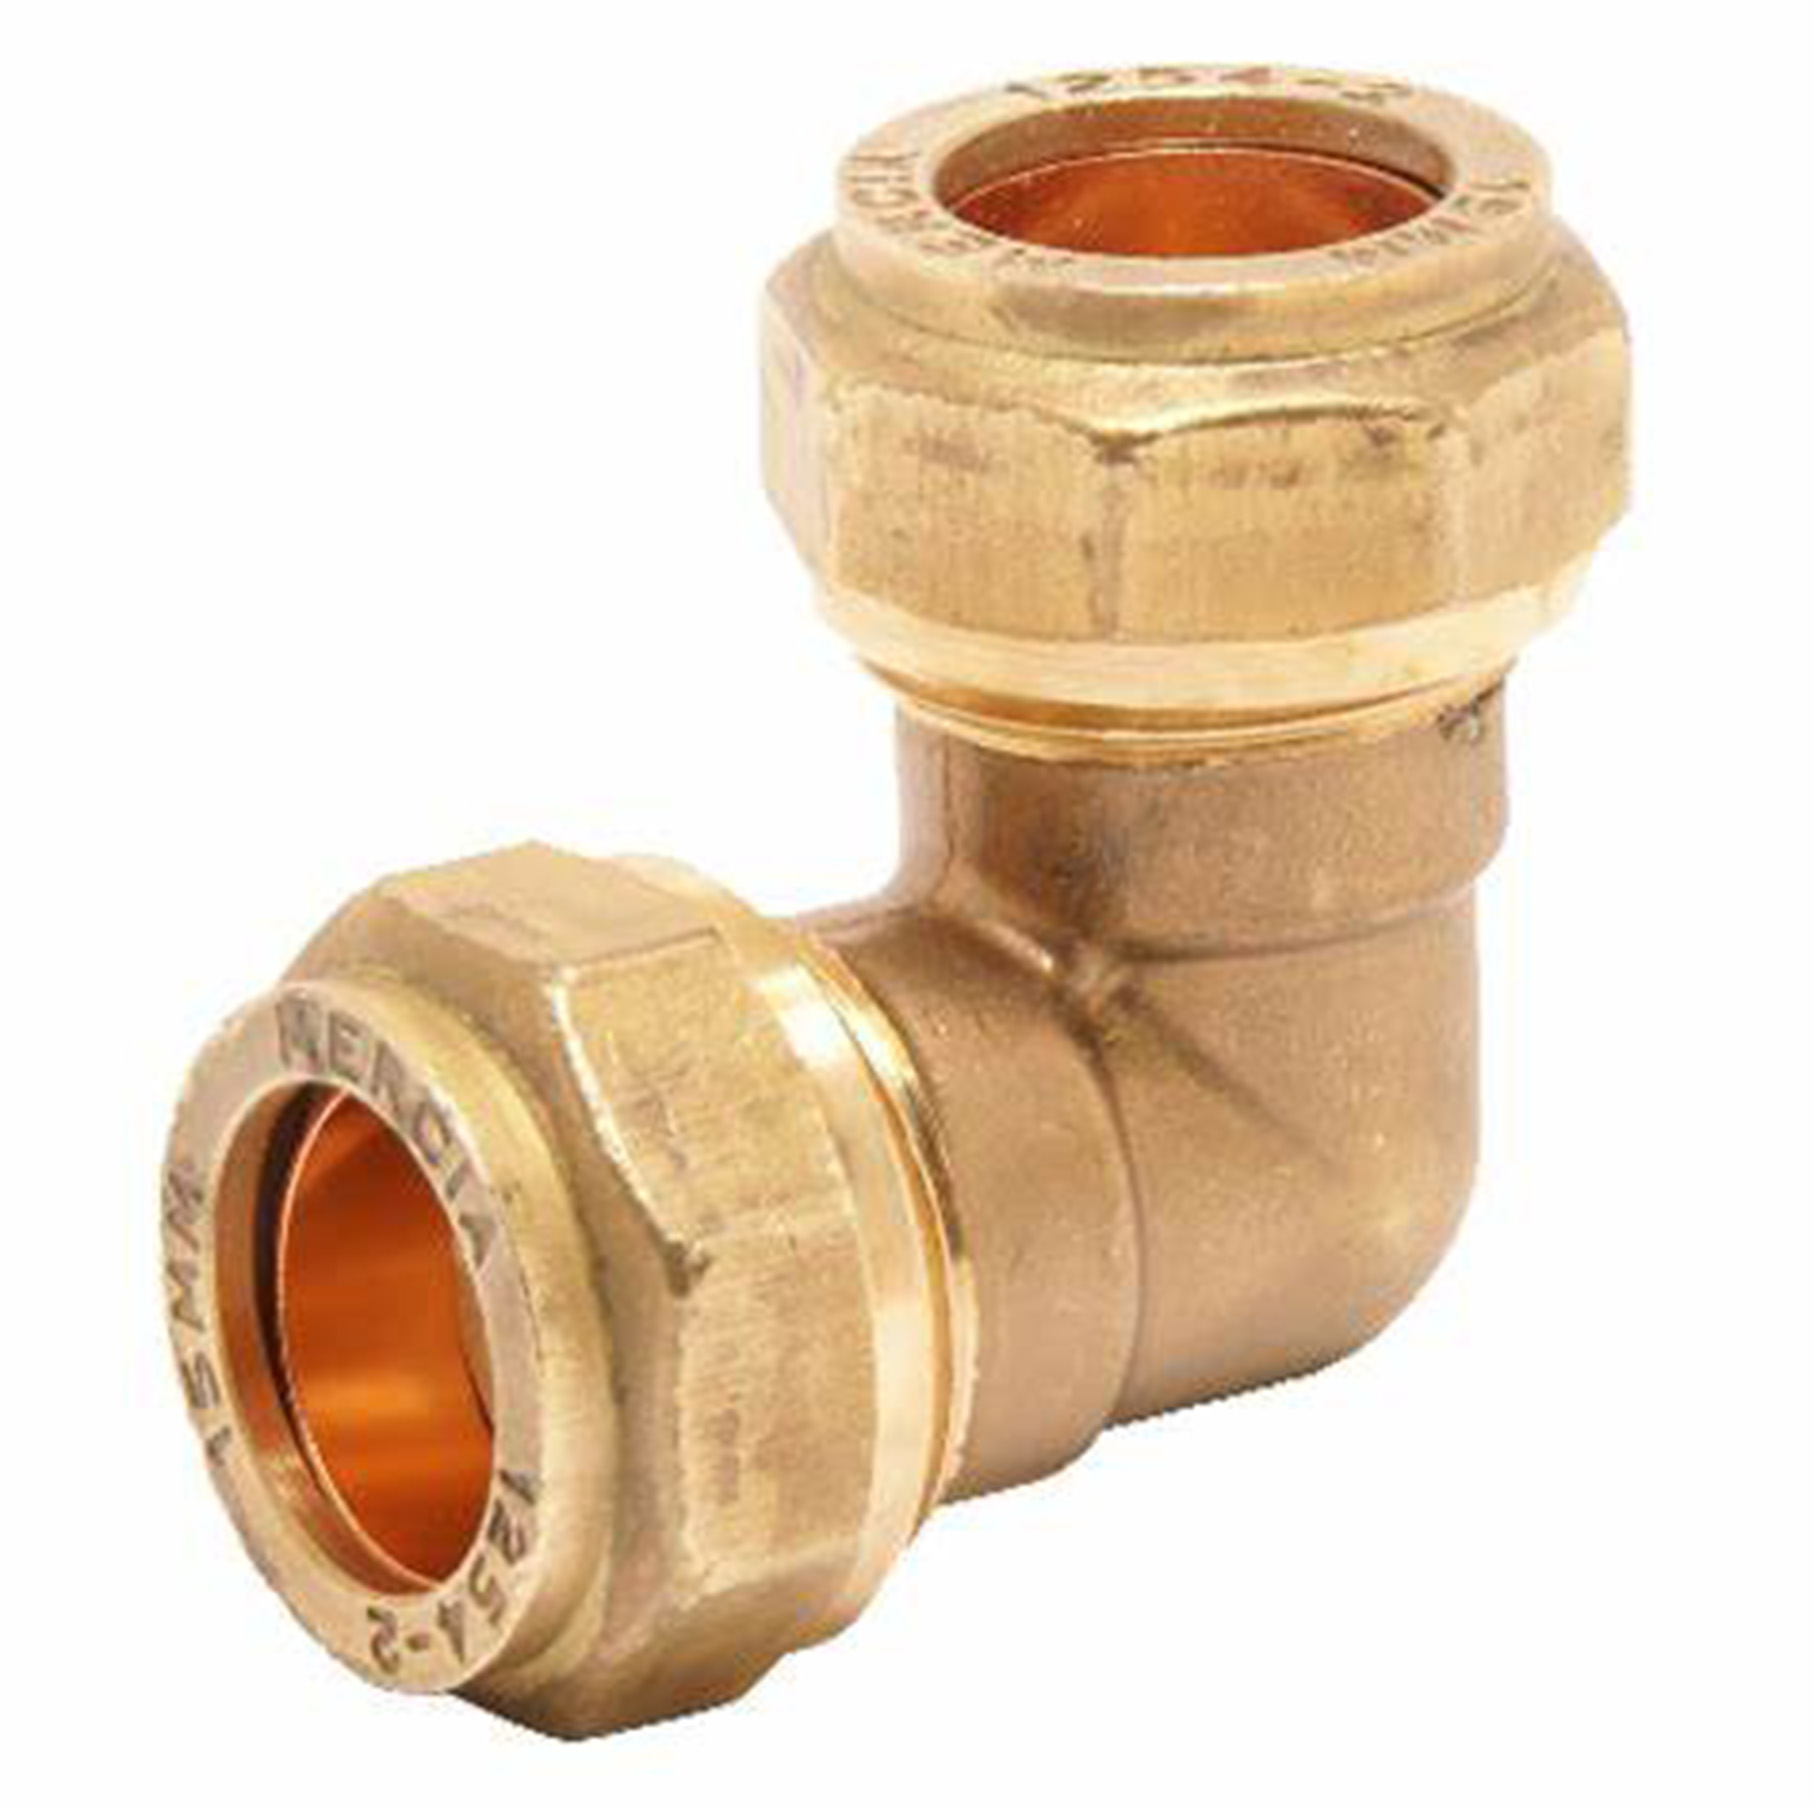 Oem dongguan brass bronze copper cast manufacture lost wax investment casting copper pipe fitting